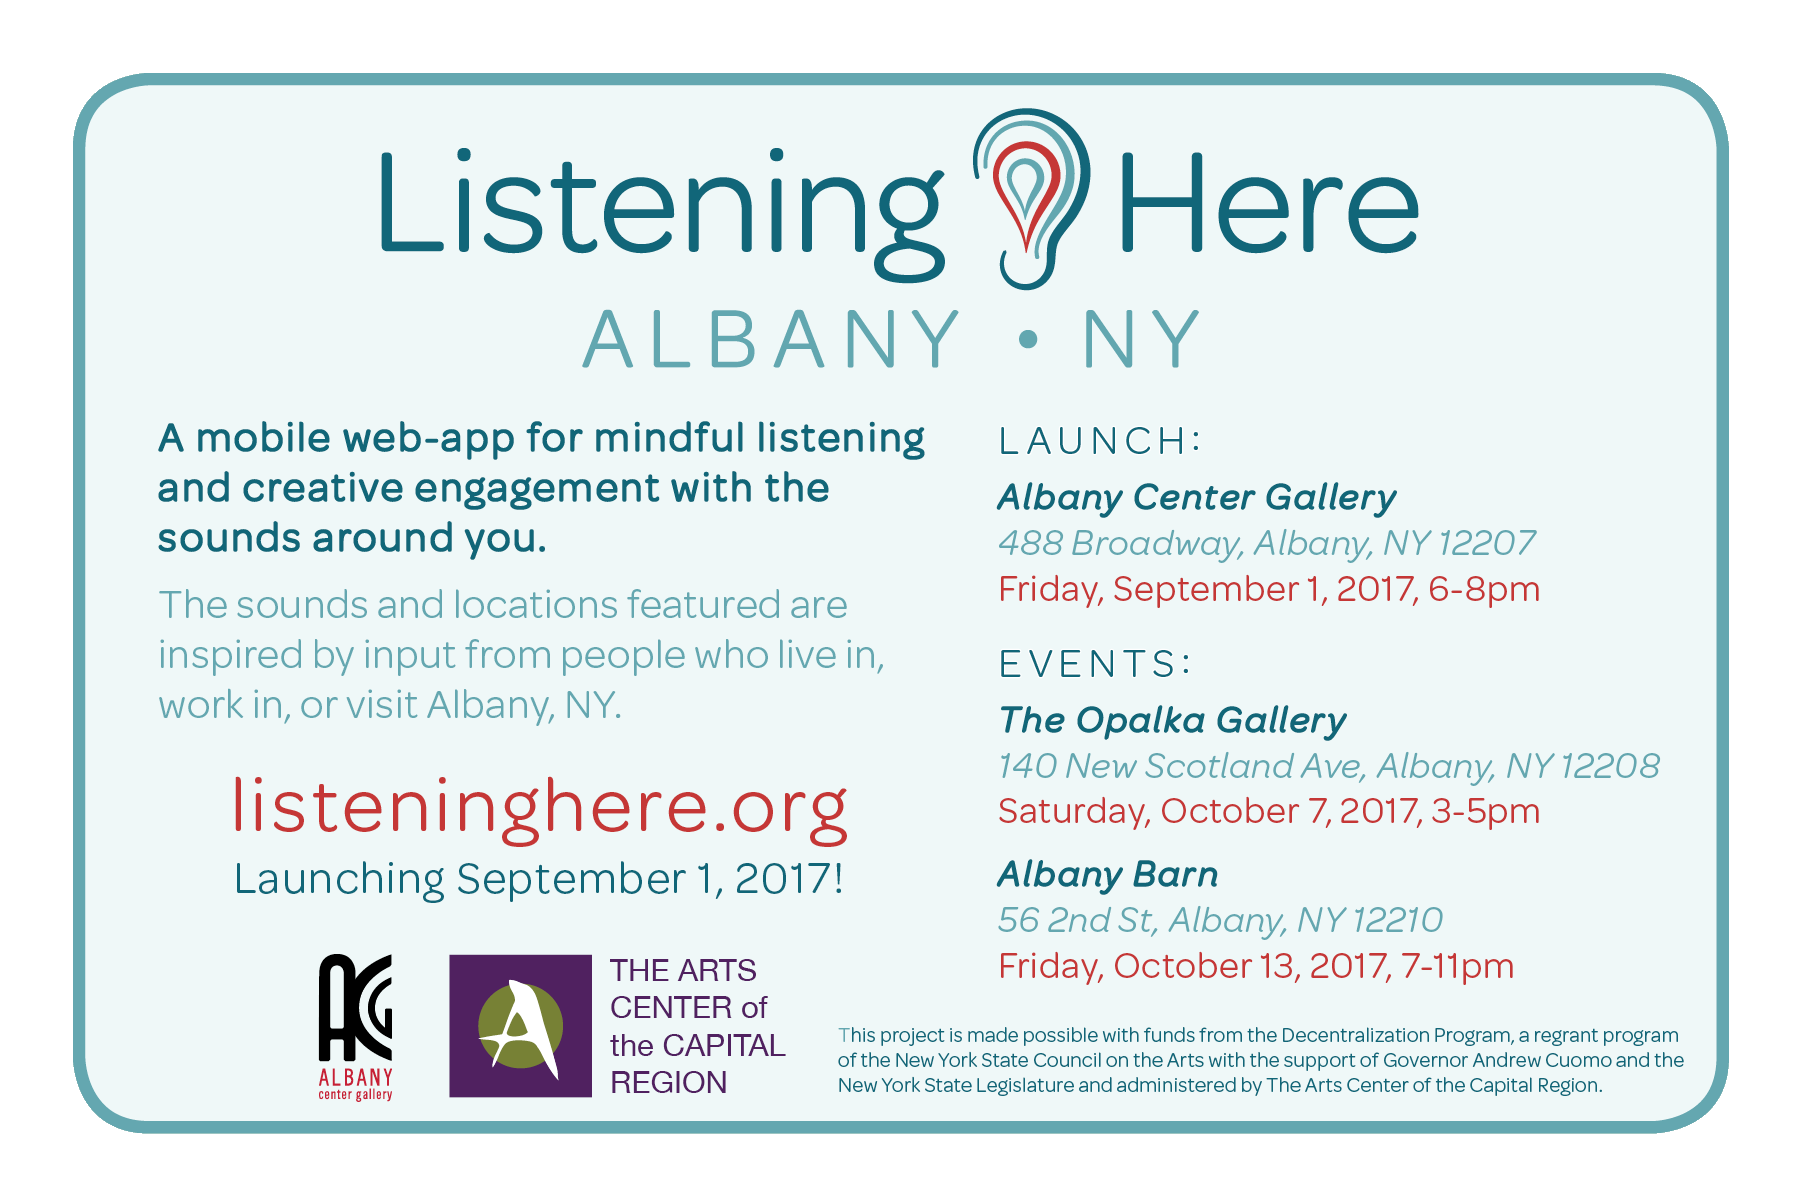 Listening Here: Albany NY.
  A mobile web-app for mindful listening and creative engagement with the sounds around you.
  The sounds and locations featured are inspired by input from people who live in, work in, or visit Albany, NY.
  Launch: Friday, September 1, 2017, 6-8pm at Albany Center Gallery, 488 Broadway, Albany, NY 12208.
  Events: Saturday, October 7, 2017, 3-5pm at the Opalka Gallery, 140 New Scotland Ave, Albany, NY 12208.
  Friday, October 13, 2017, 7-11pm at the Albany Barn, 56 2nd St, Albany, NY 12210.